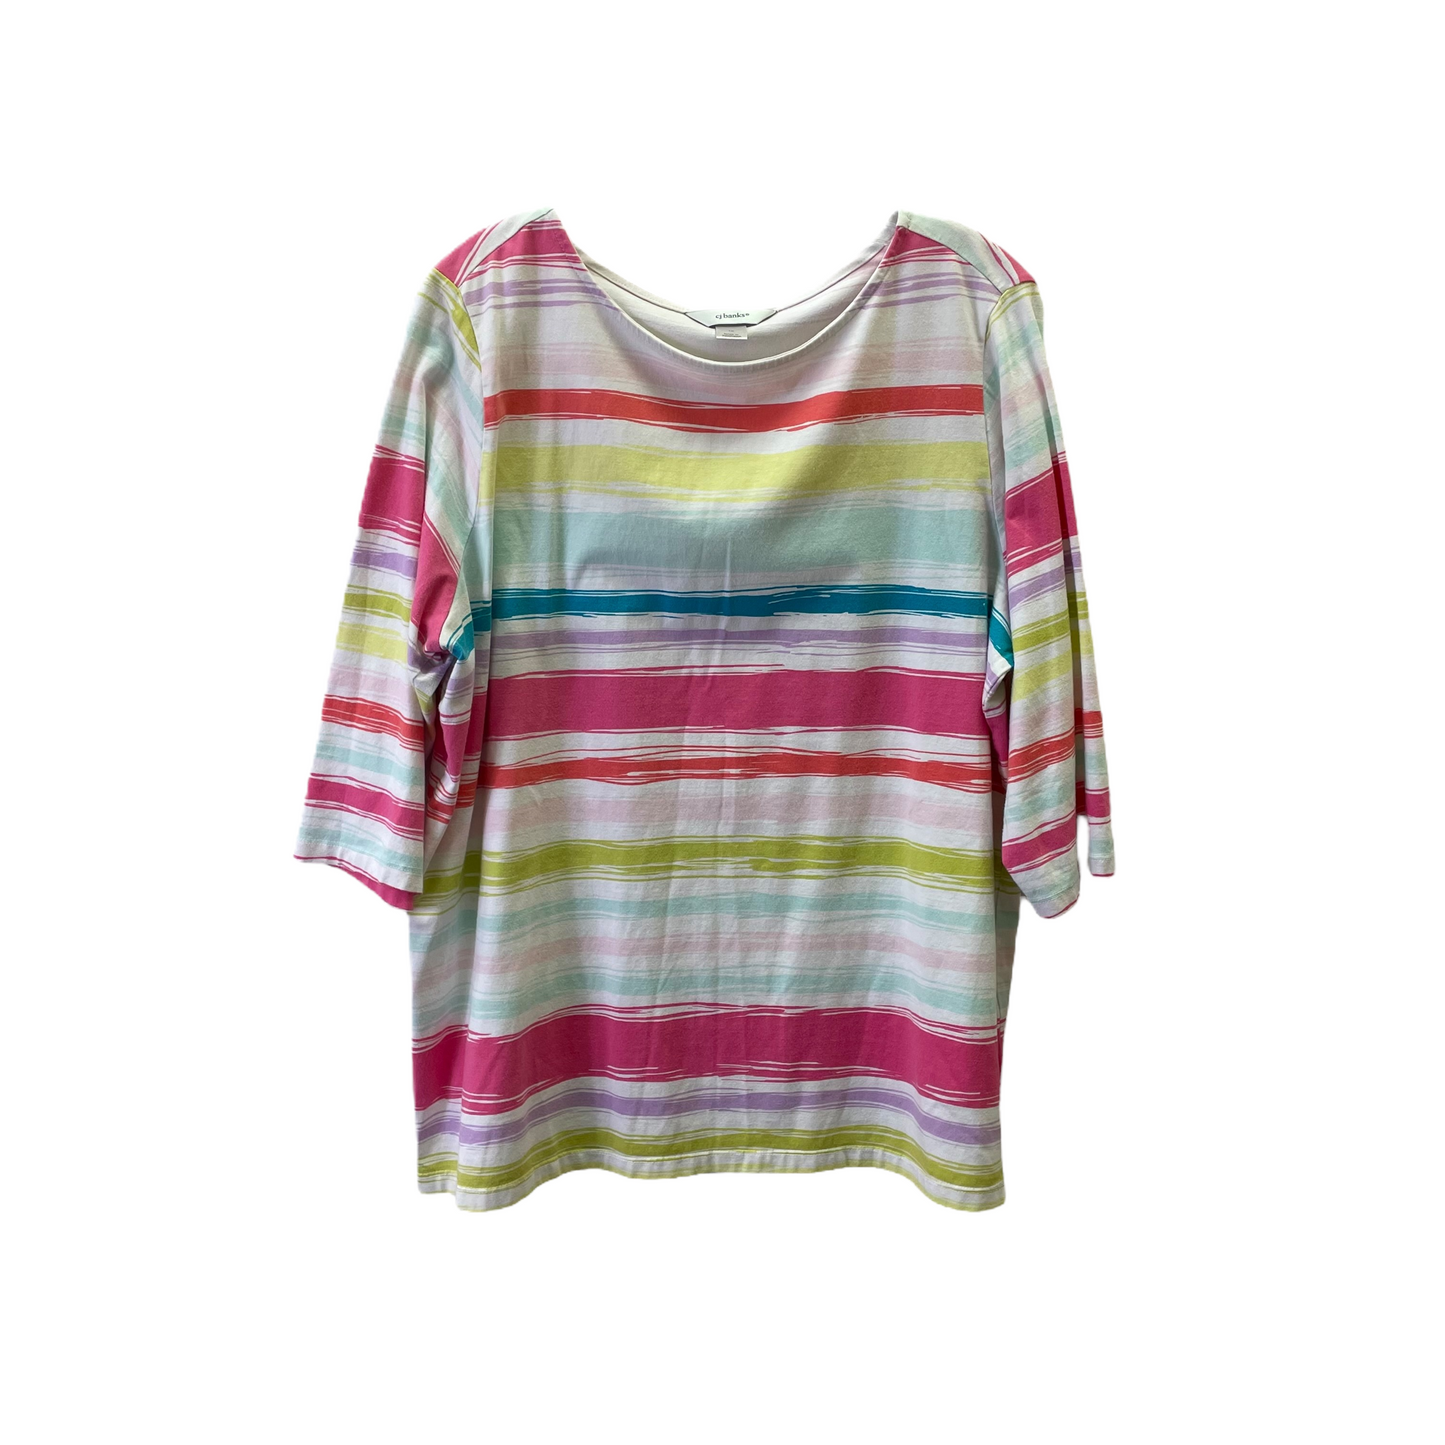 Multi-colored Top 3/4 Sleeve By Cj Banks, Size: 1x